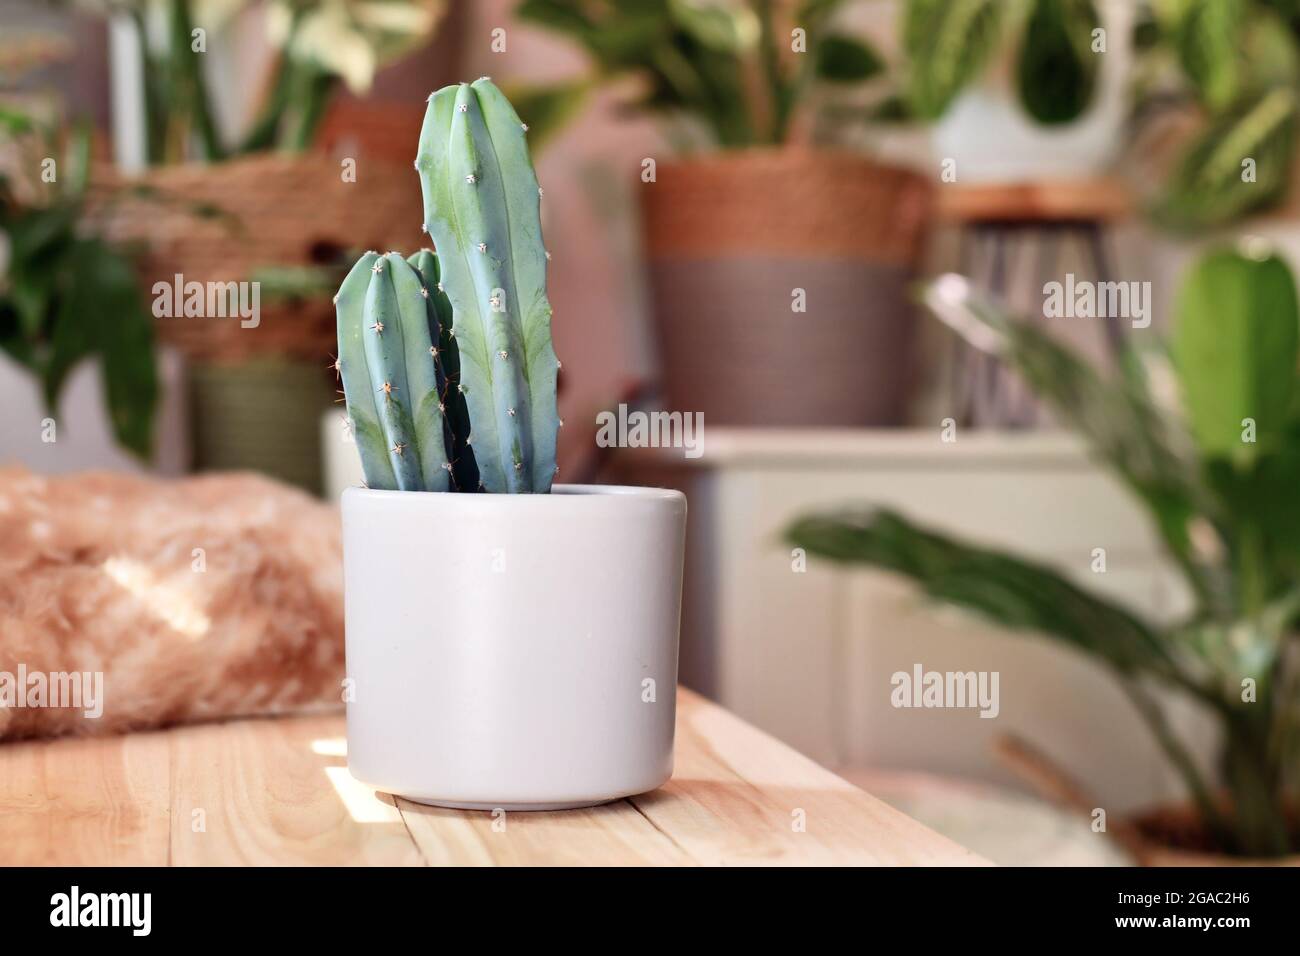 Potted Cereus Cactus houseplant on wooden table with other plants in blurry background Stock Photo